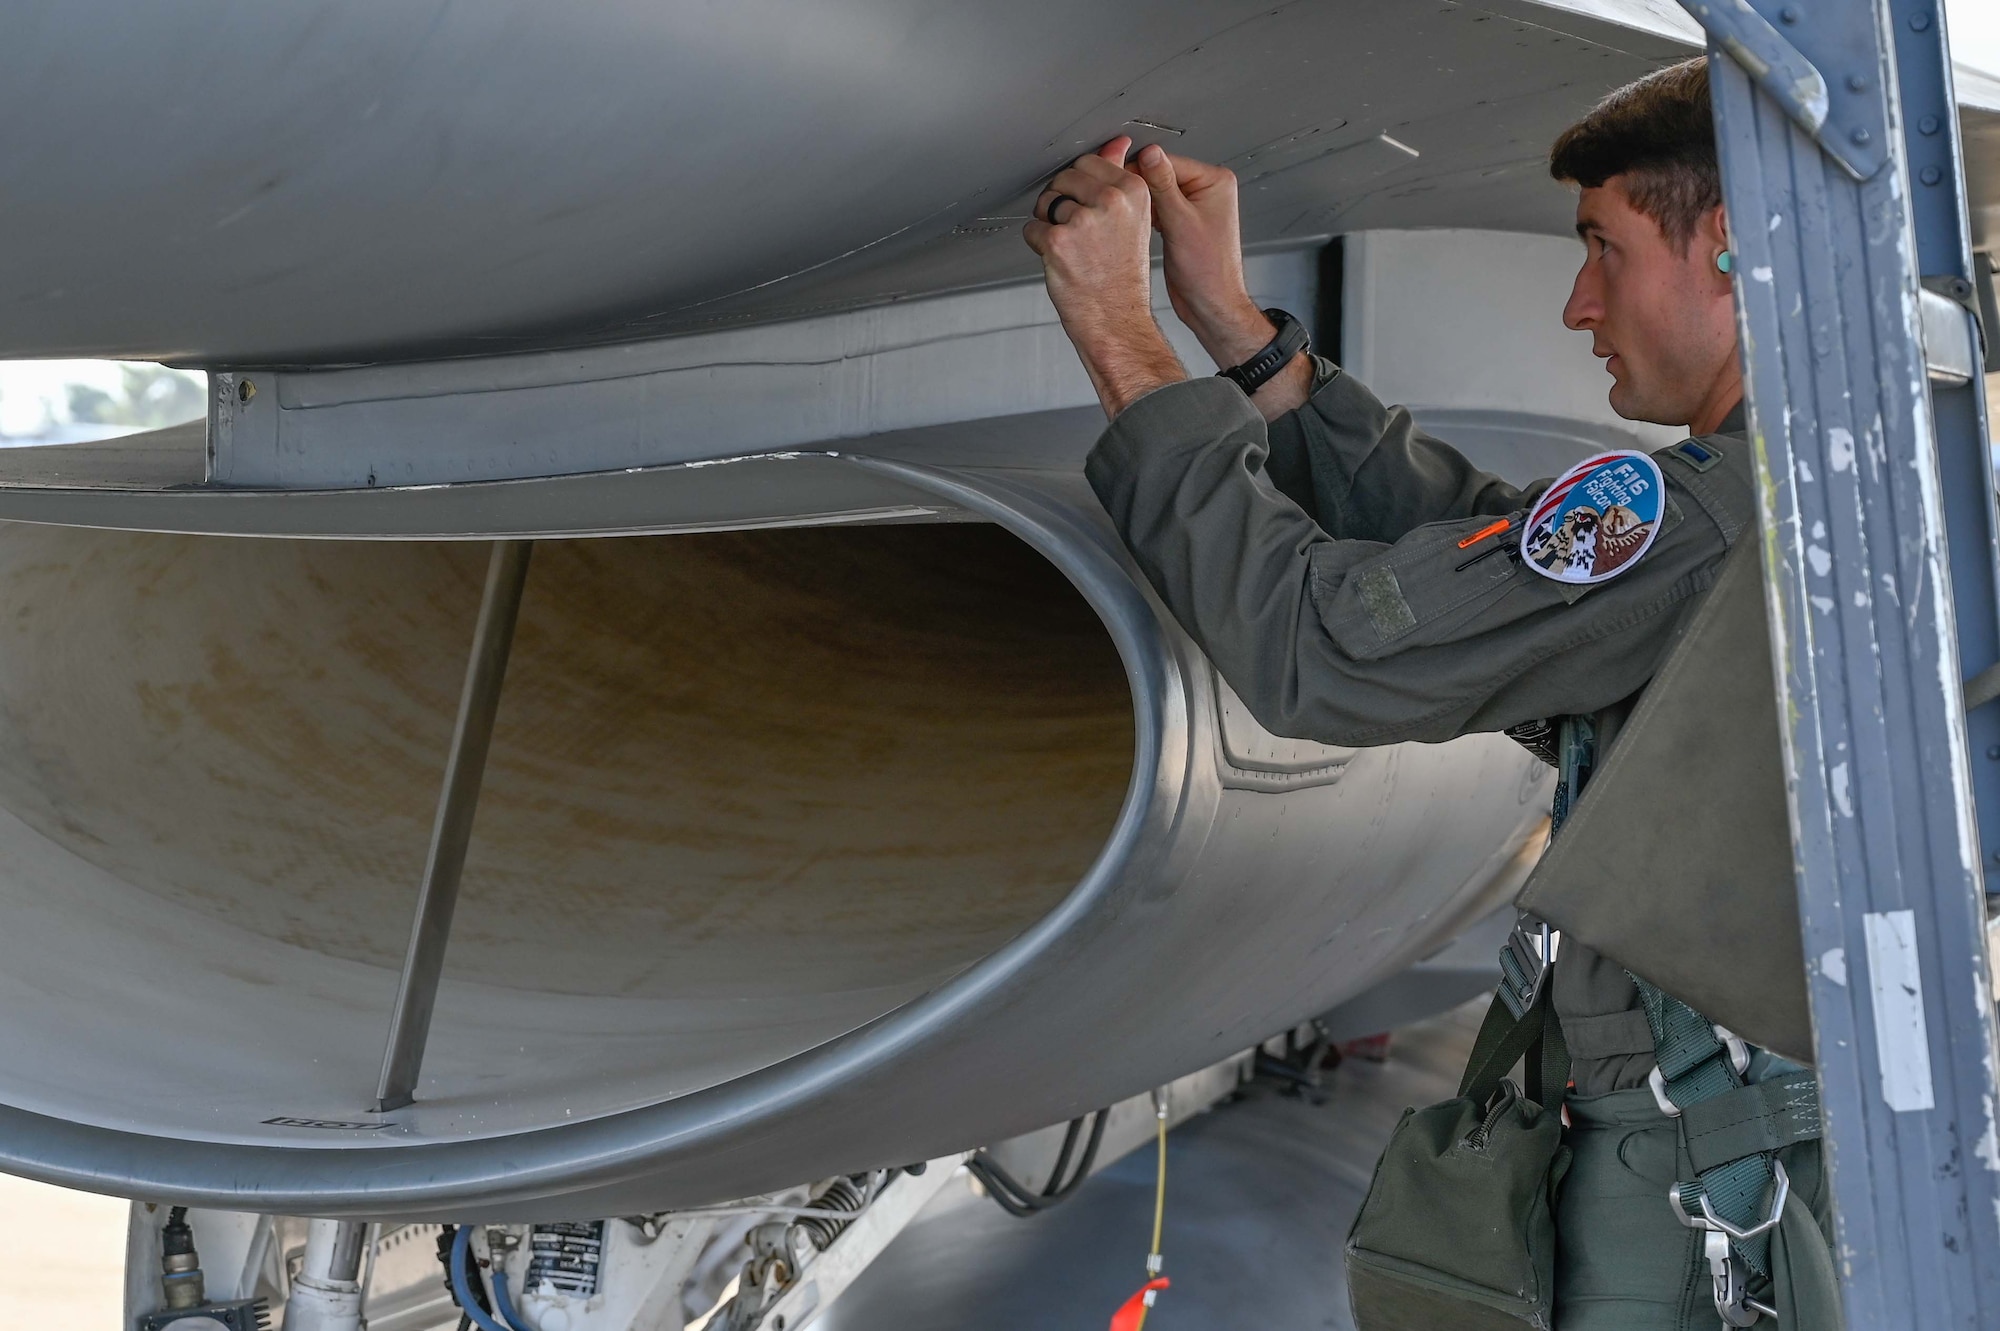 1st Lt. Nathan Thomas, an active-duty F-16 student pilot, prepares his jet for a training mission alongside his dad, Lt. Col. Joseph Thomas, a Drill Status Guardsman F-16 instructor pilot with the 162nd Wing in Tucson, Ariz. (U.S. Air National Guard photo by Maj. Angela Walz)